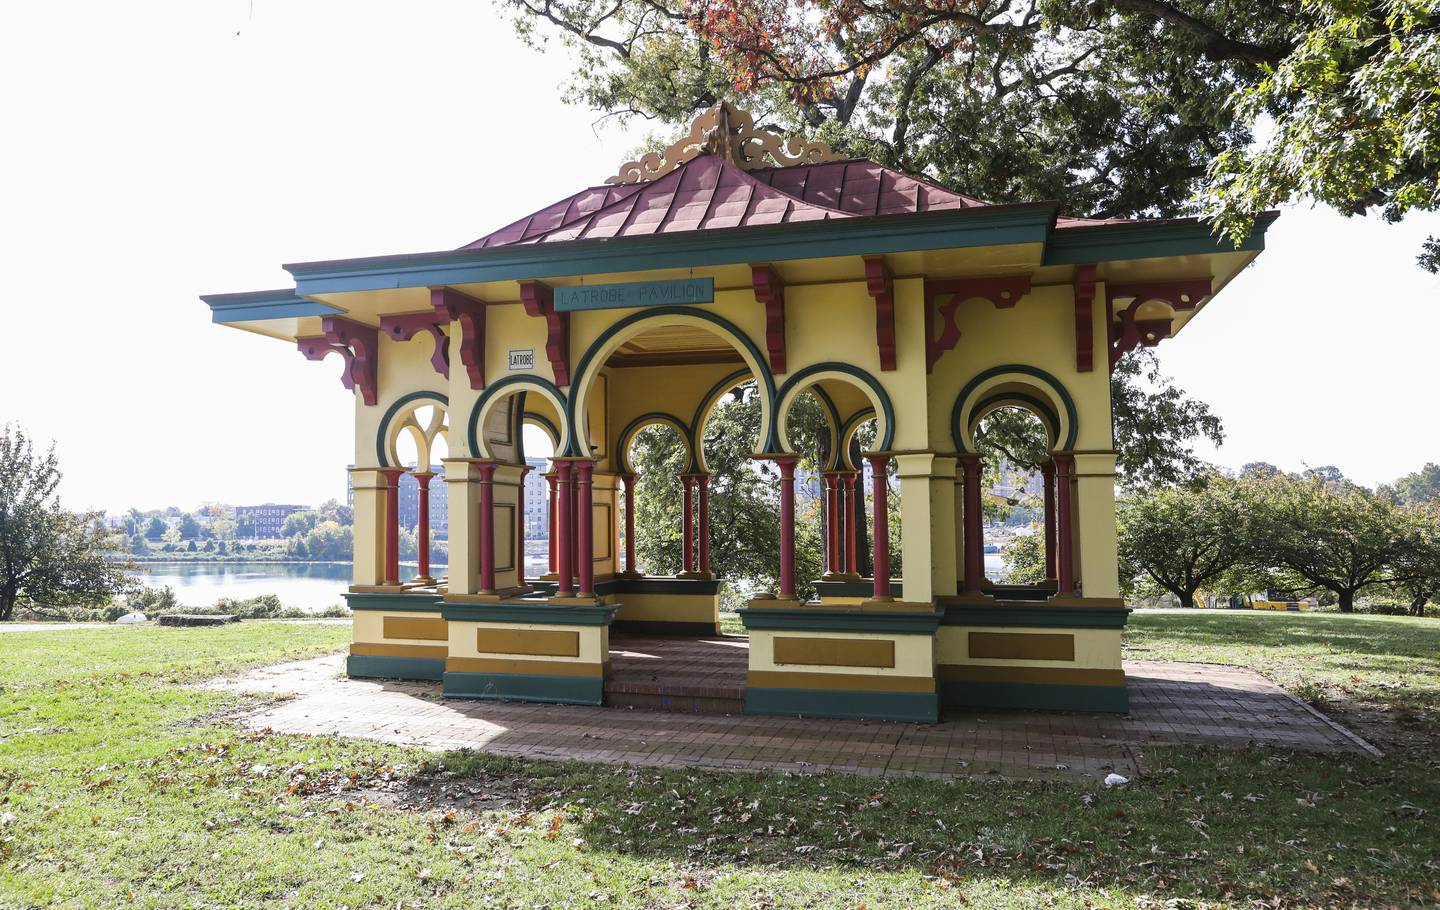 The Latrobe Pavillion was built in 1860 and overlooks the water at Druid Hill Park. Druid Hill Park is a 745 acre urban park situated in Northwest Baltimore City, it borders up against the JFX and I-83.